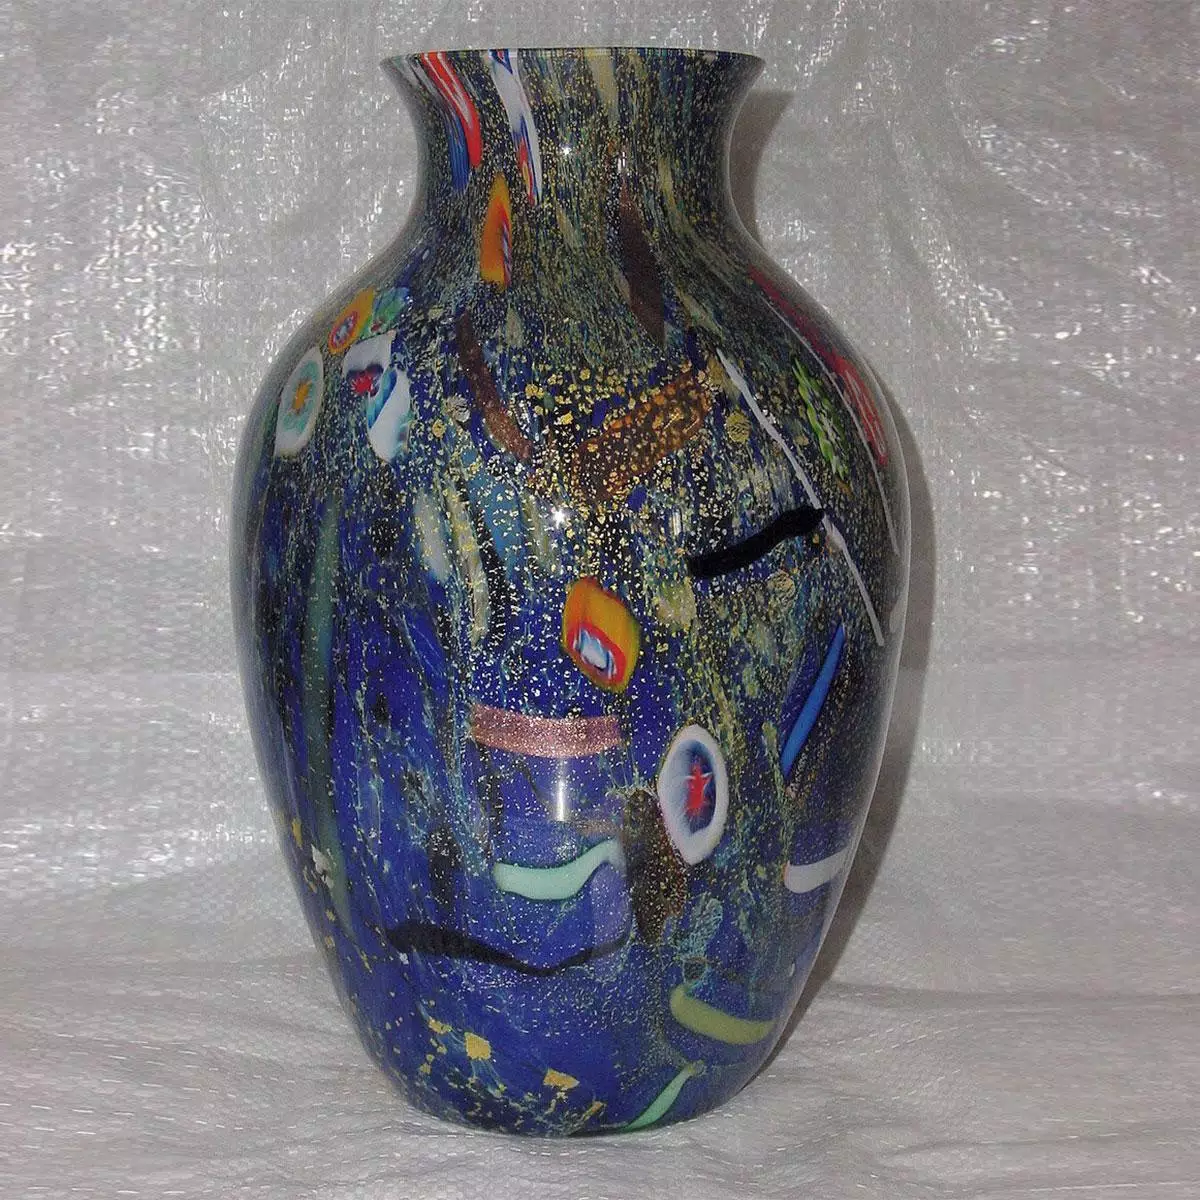 "Pablito" Murano glass vase - Large - blue and polychrome